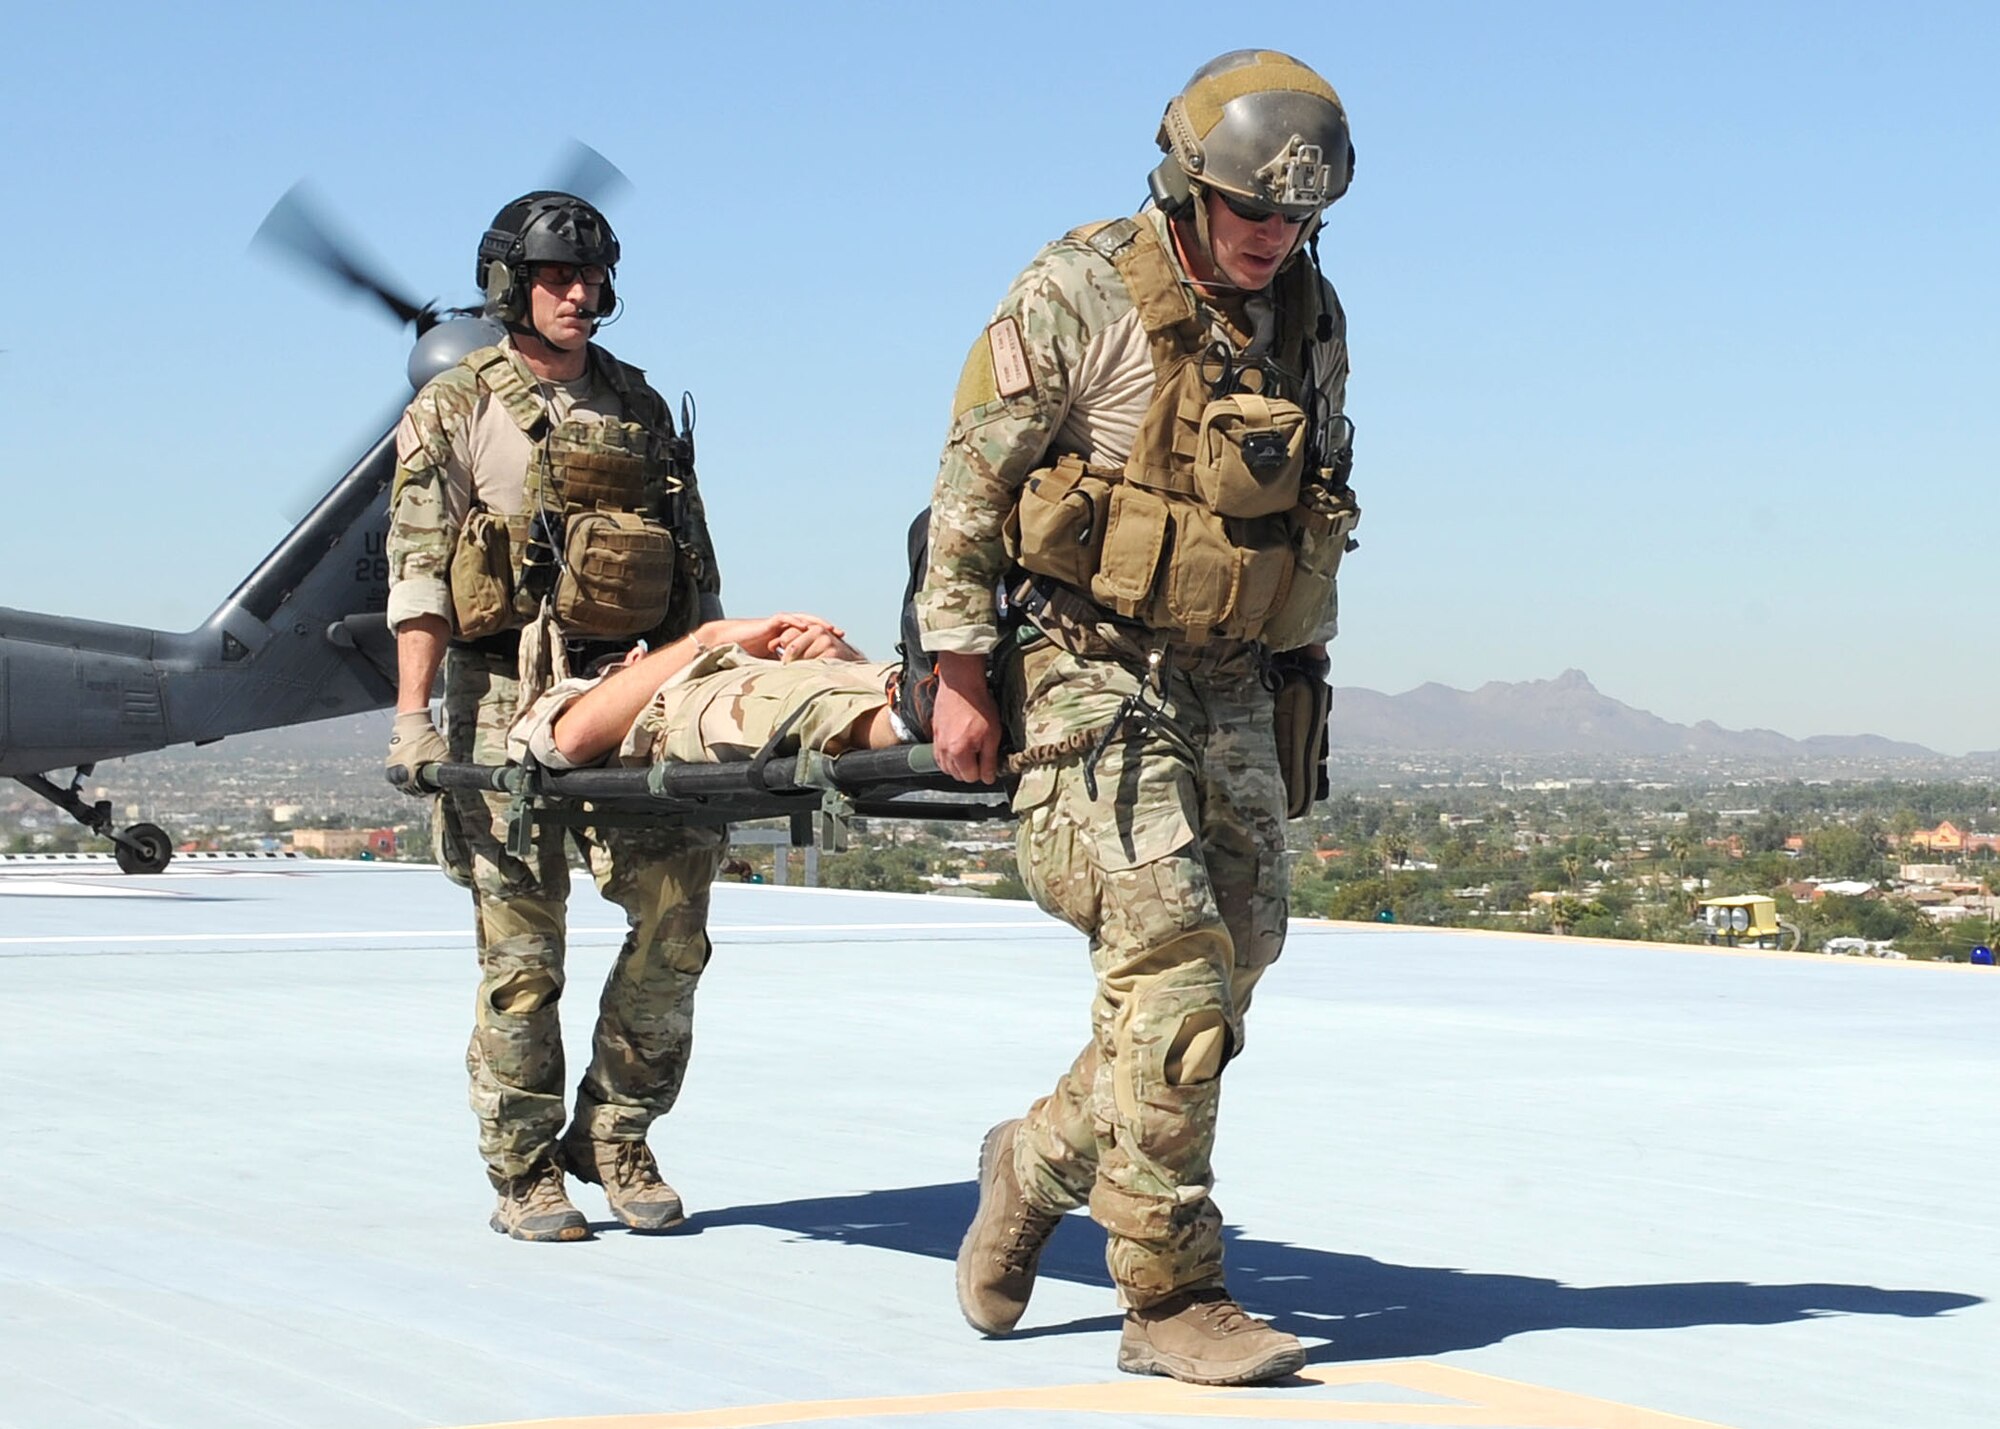 Participants of Angel Thunder carry a patient with simulated wounds to the care of medics at University of Arizona Medical Center Oct. 11. Approximately 1,400 U.S. Military, federal and state employees, and coalition forces are participating in the fifth-annual Angel Thunder exercise, the largest military combat search and rescue exercise in the world. (U.S. Air Force photo by Senior Airman Brittany Dowdle)